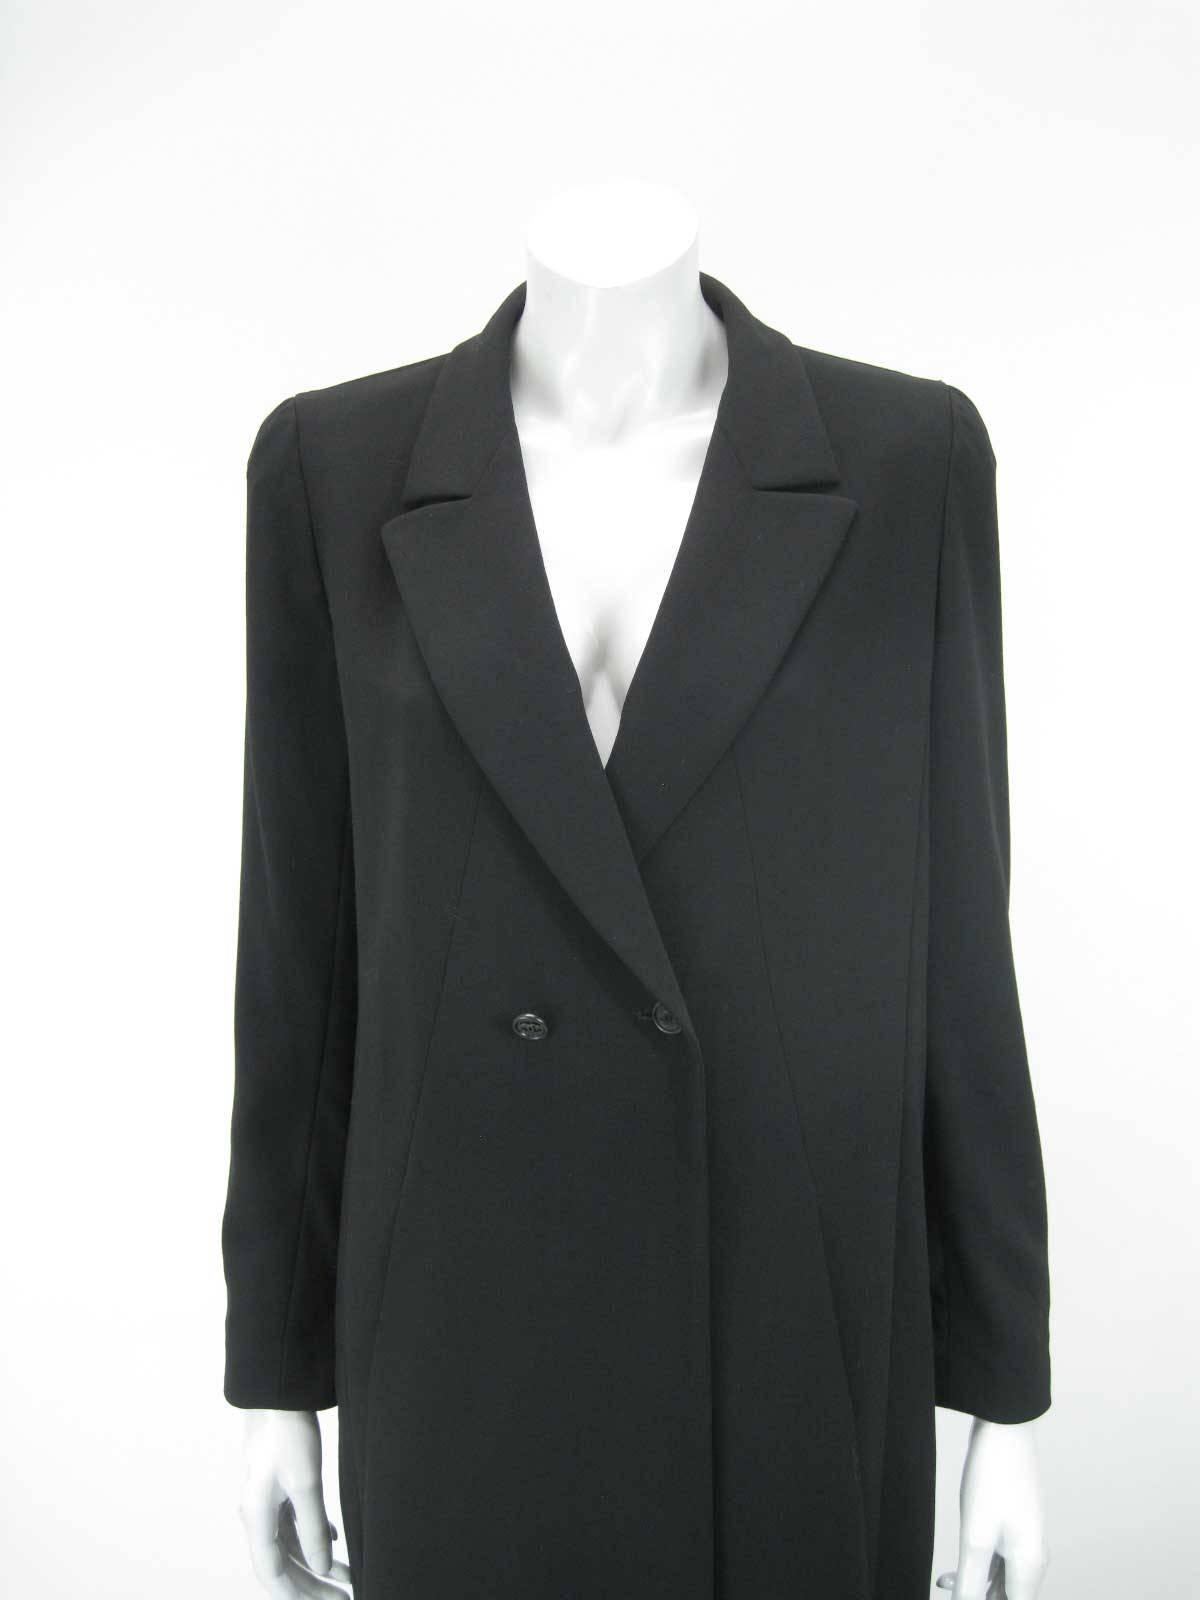 Elegant Chanel Boutique long black jacket. I believe the 98P denotes Printemps 98, or Spring 1998.

Suit tailoring with low neckline.

Double breasted with CC button closure and one hidden closure.

Flattering seaming with side pockets.

Fully lined